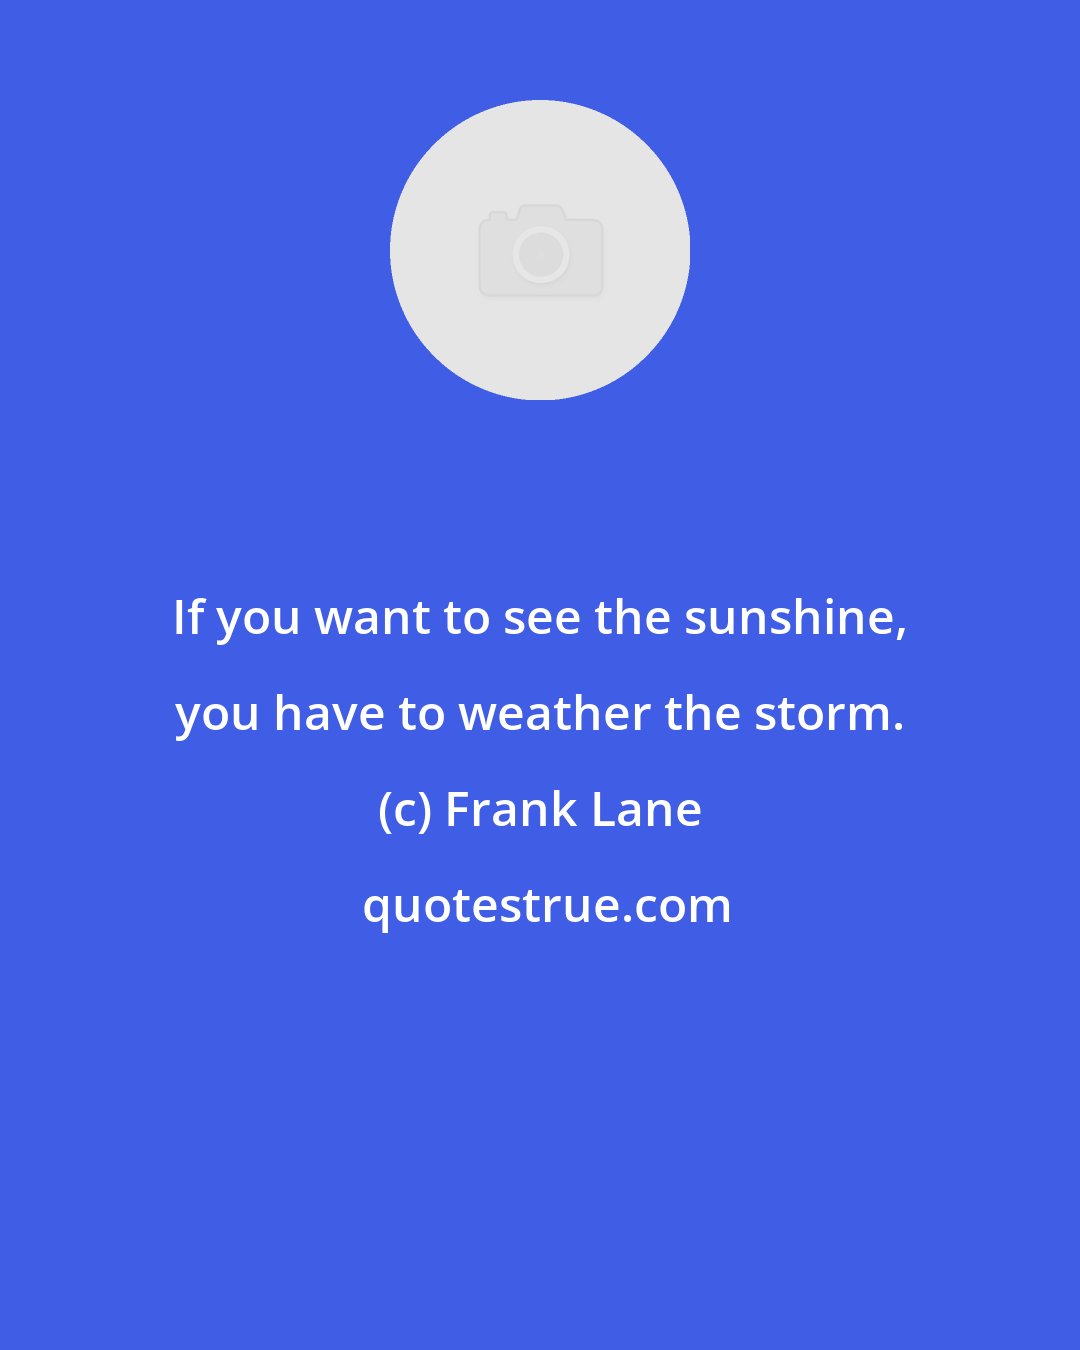 Frank Lane: If you want to see the sunshine, you have to weather the storm.